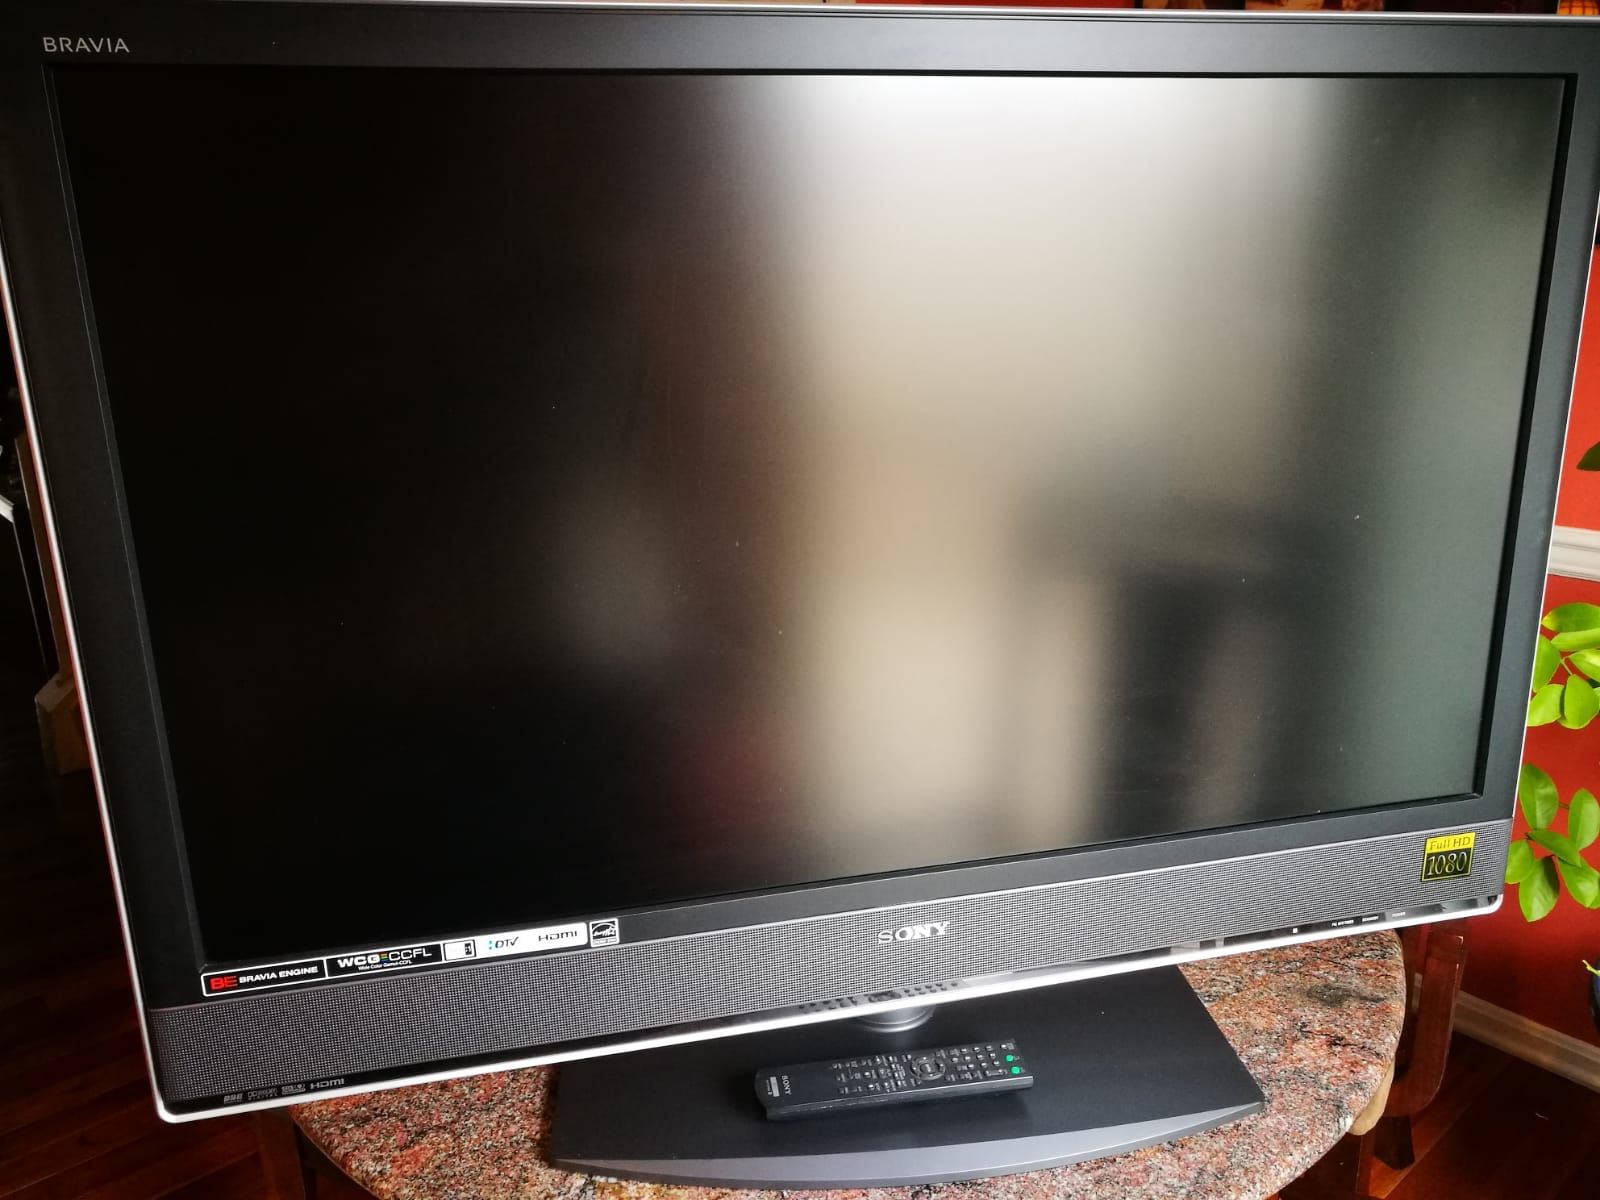 Sony Bravia 46 inch $150 used excellent condition